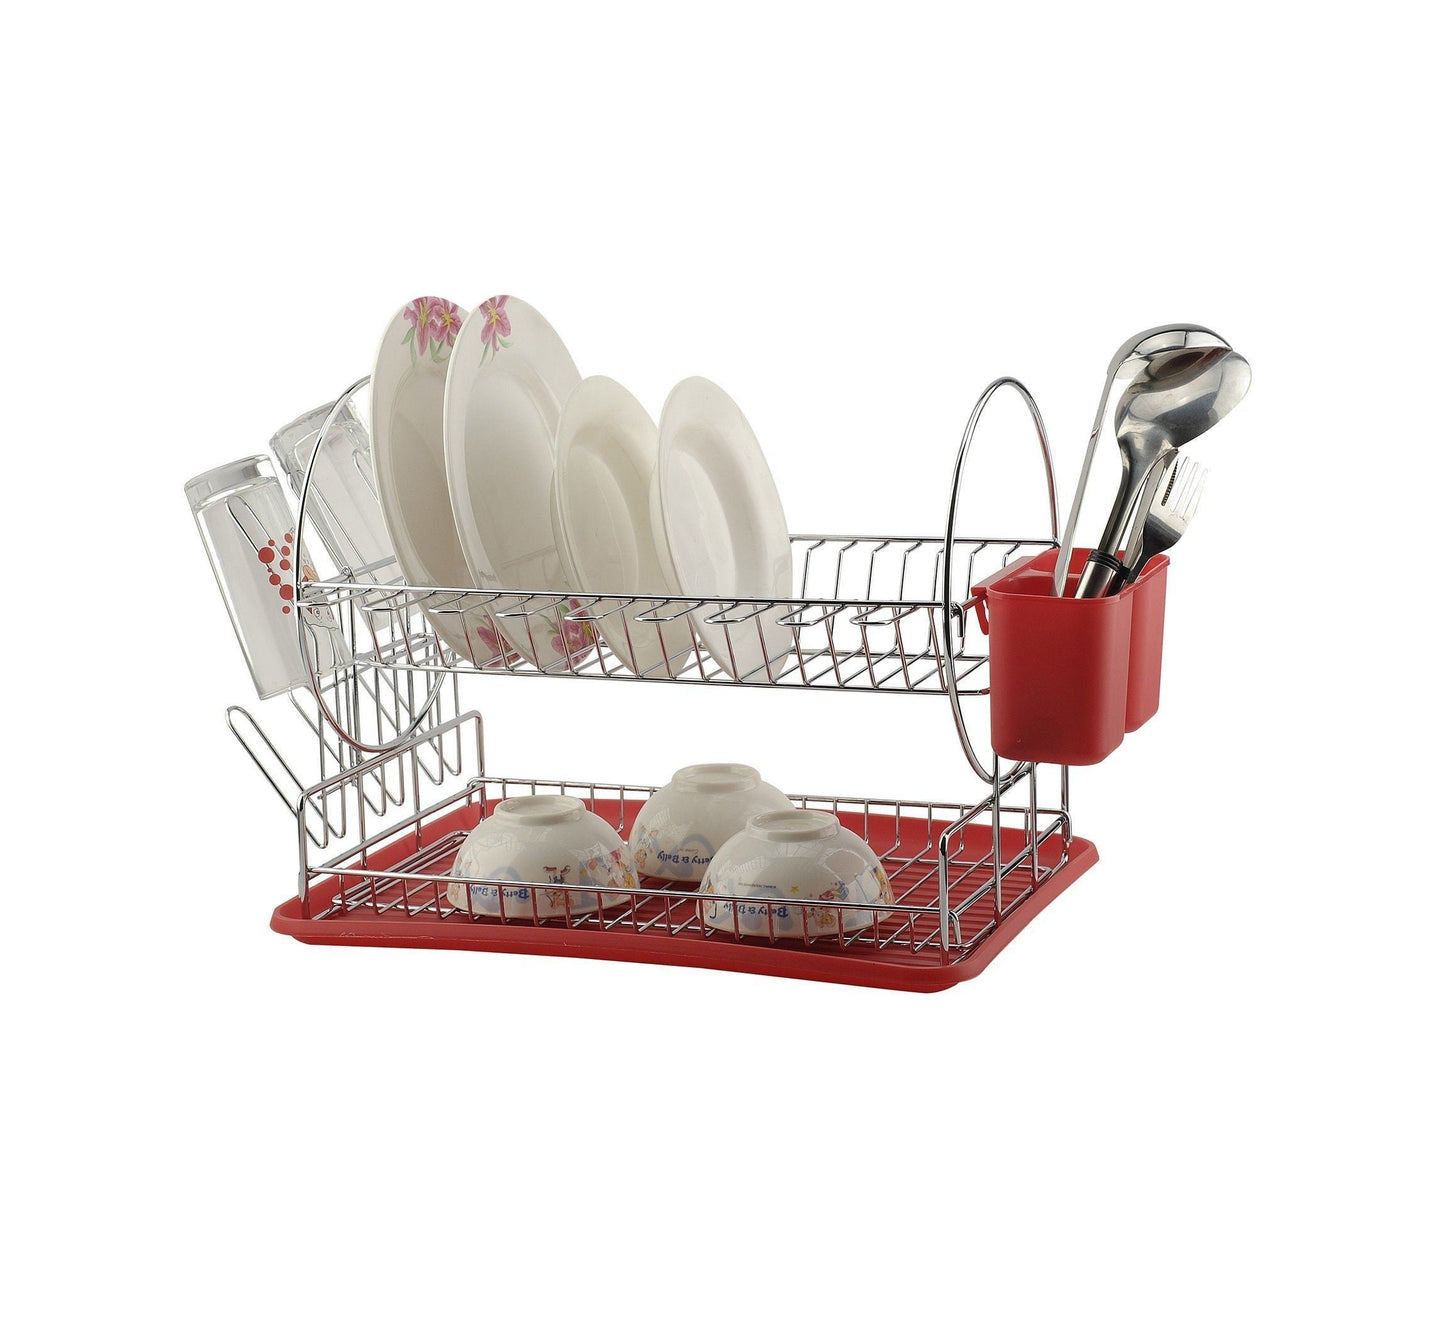 2 Tier Dish Drainer Drying Rack with Utensil Holder and Drain Board